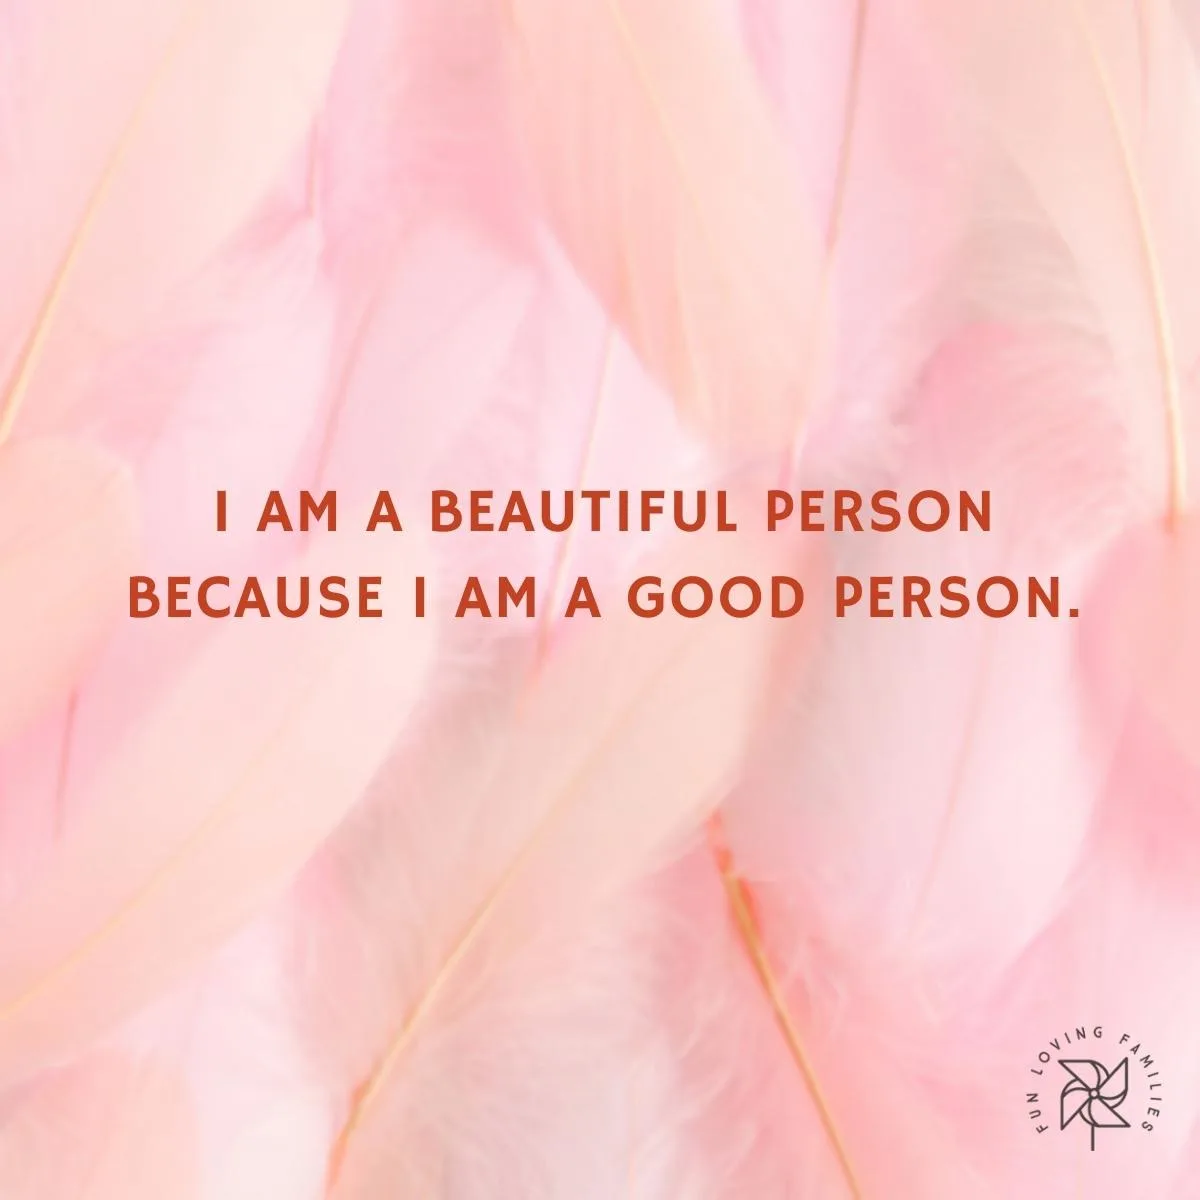 I am a beautiful person because I am a good person affirmation